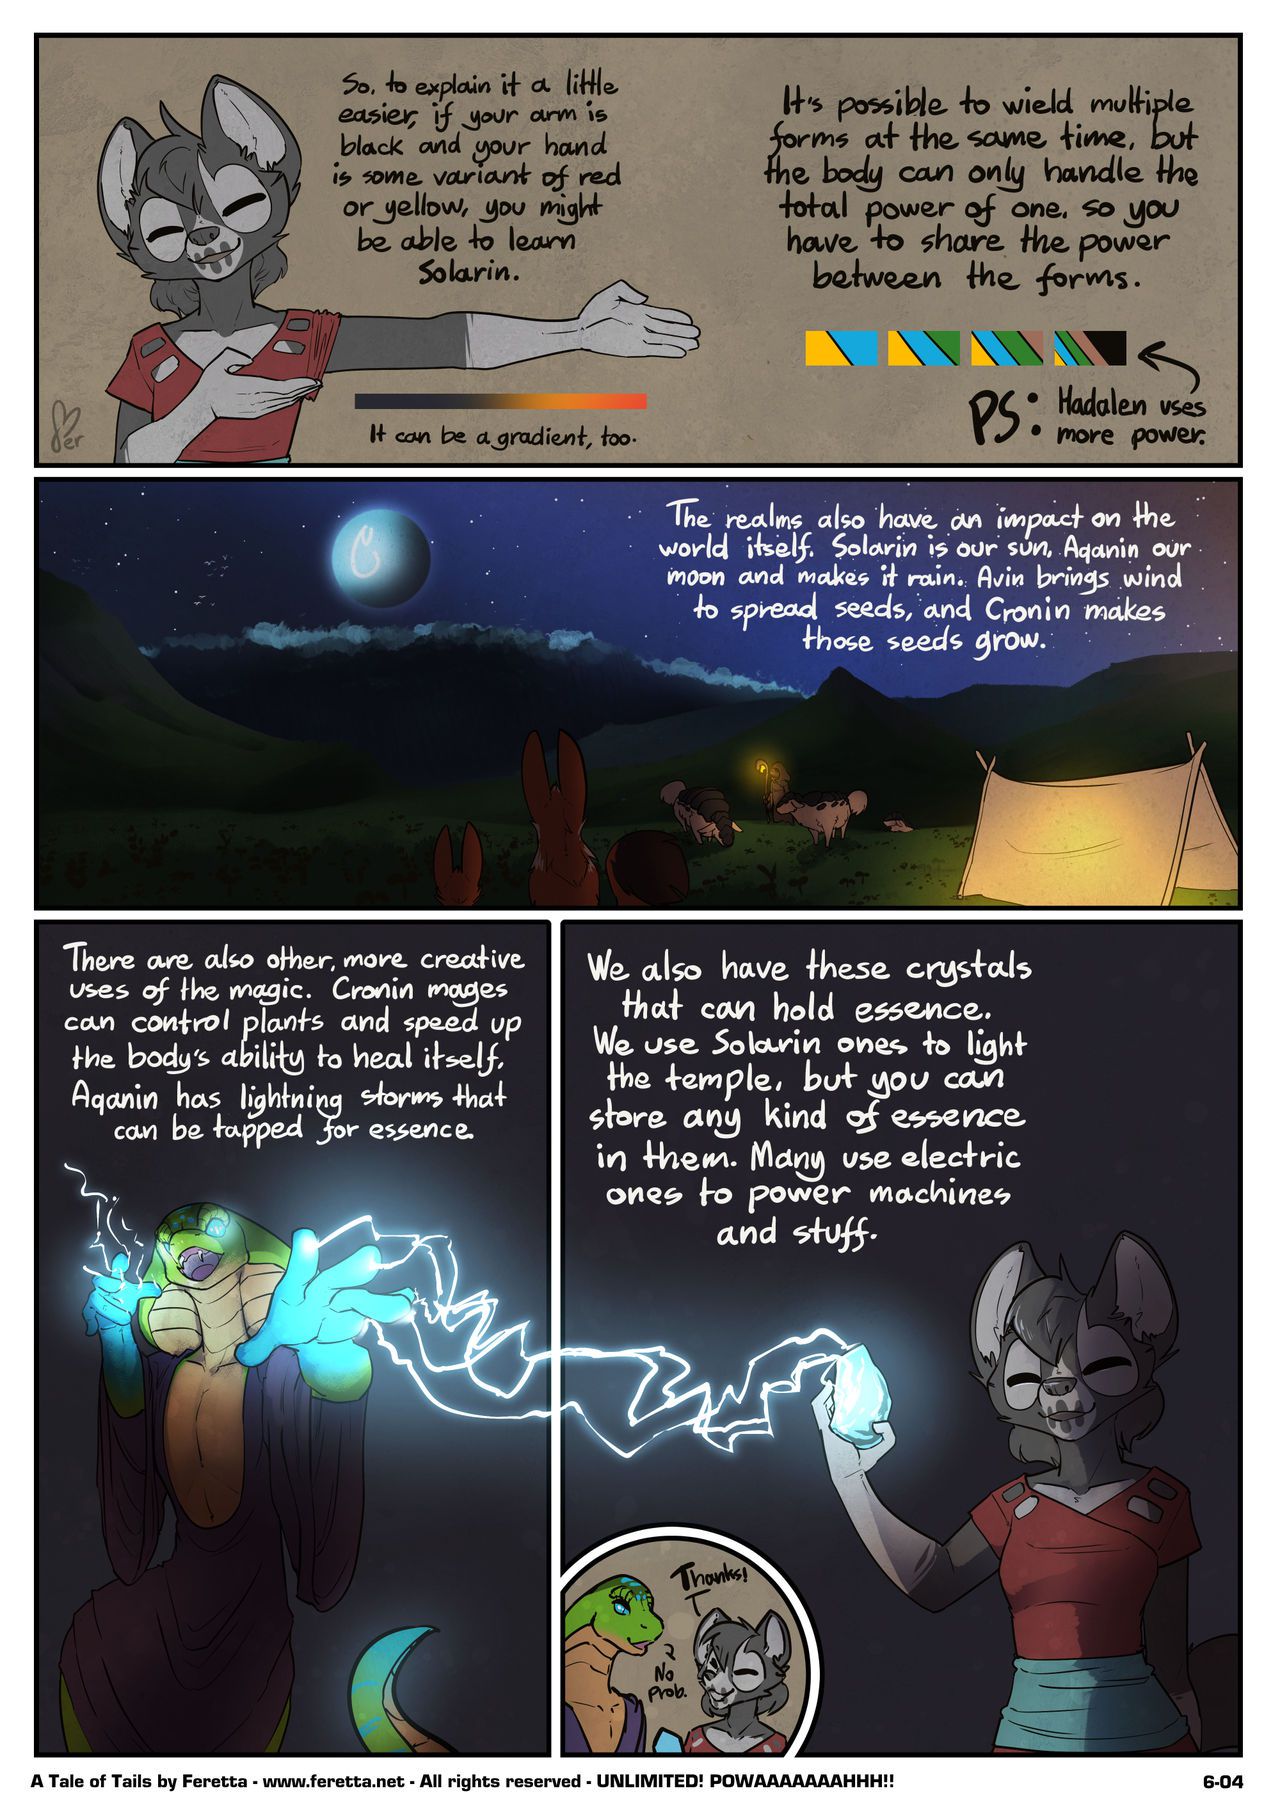 [Feretta] Farellian Legends: A Tale of Tails (w/Extras) [Ongoing] 299